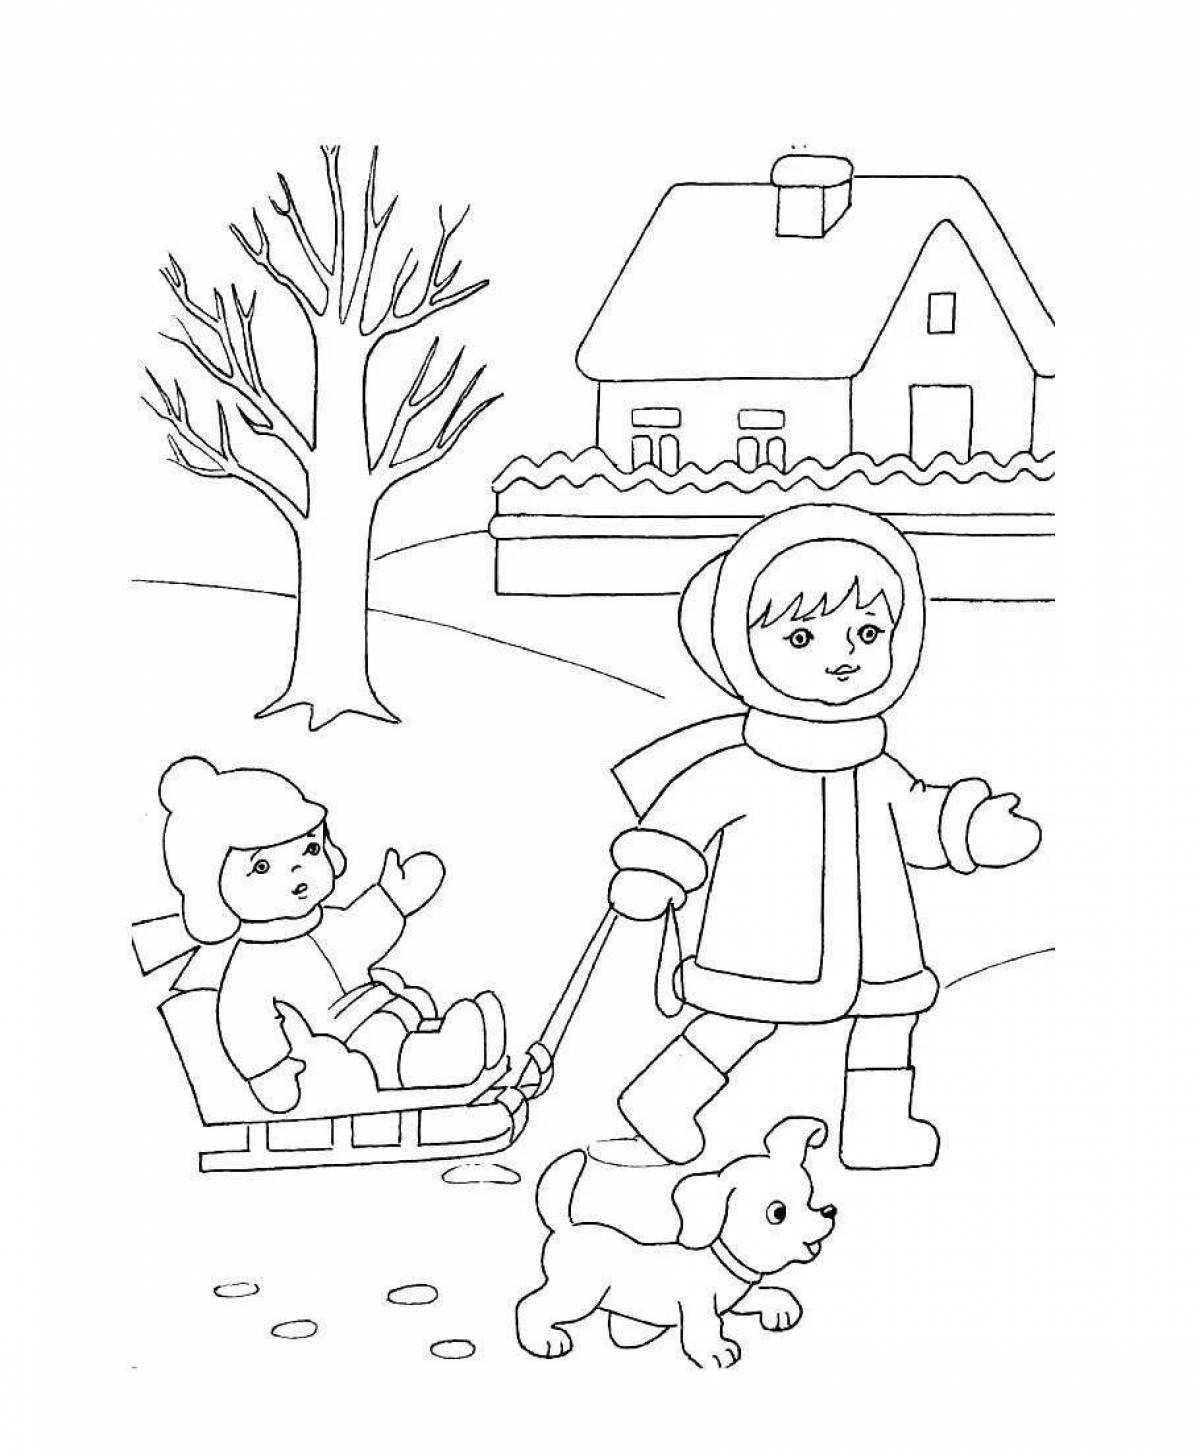 Great coloring book for kids outdoors in winter